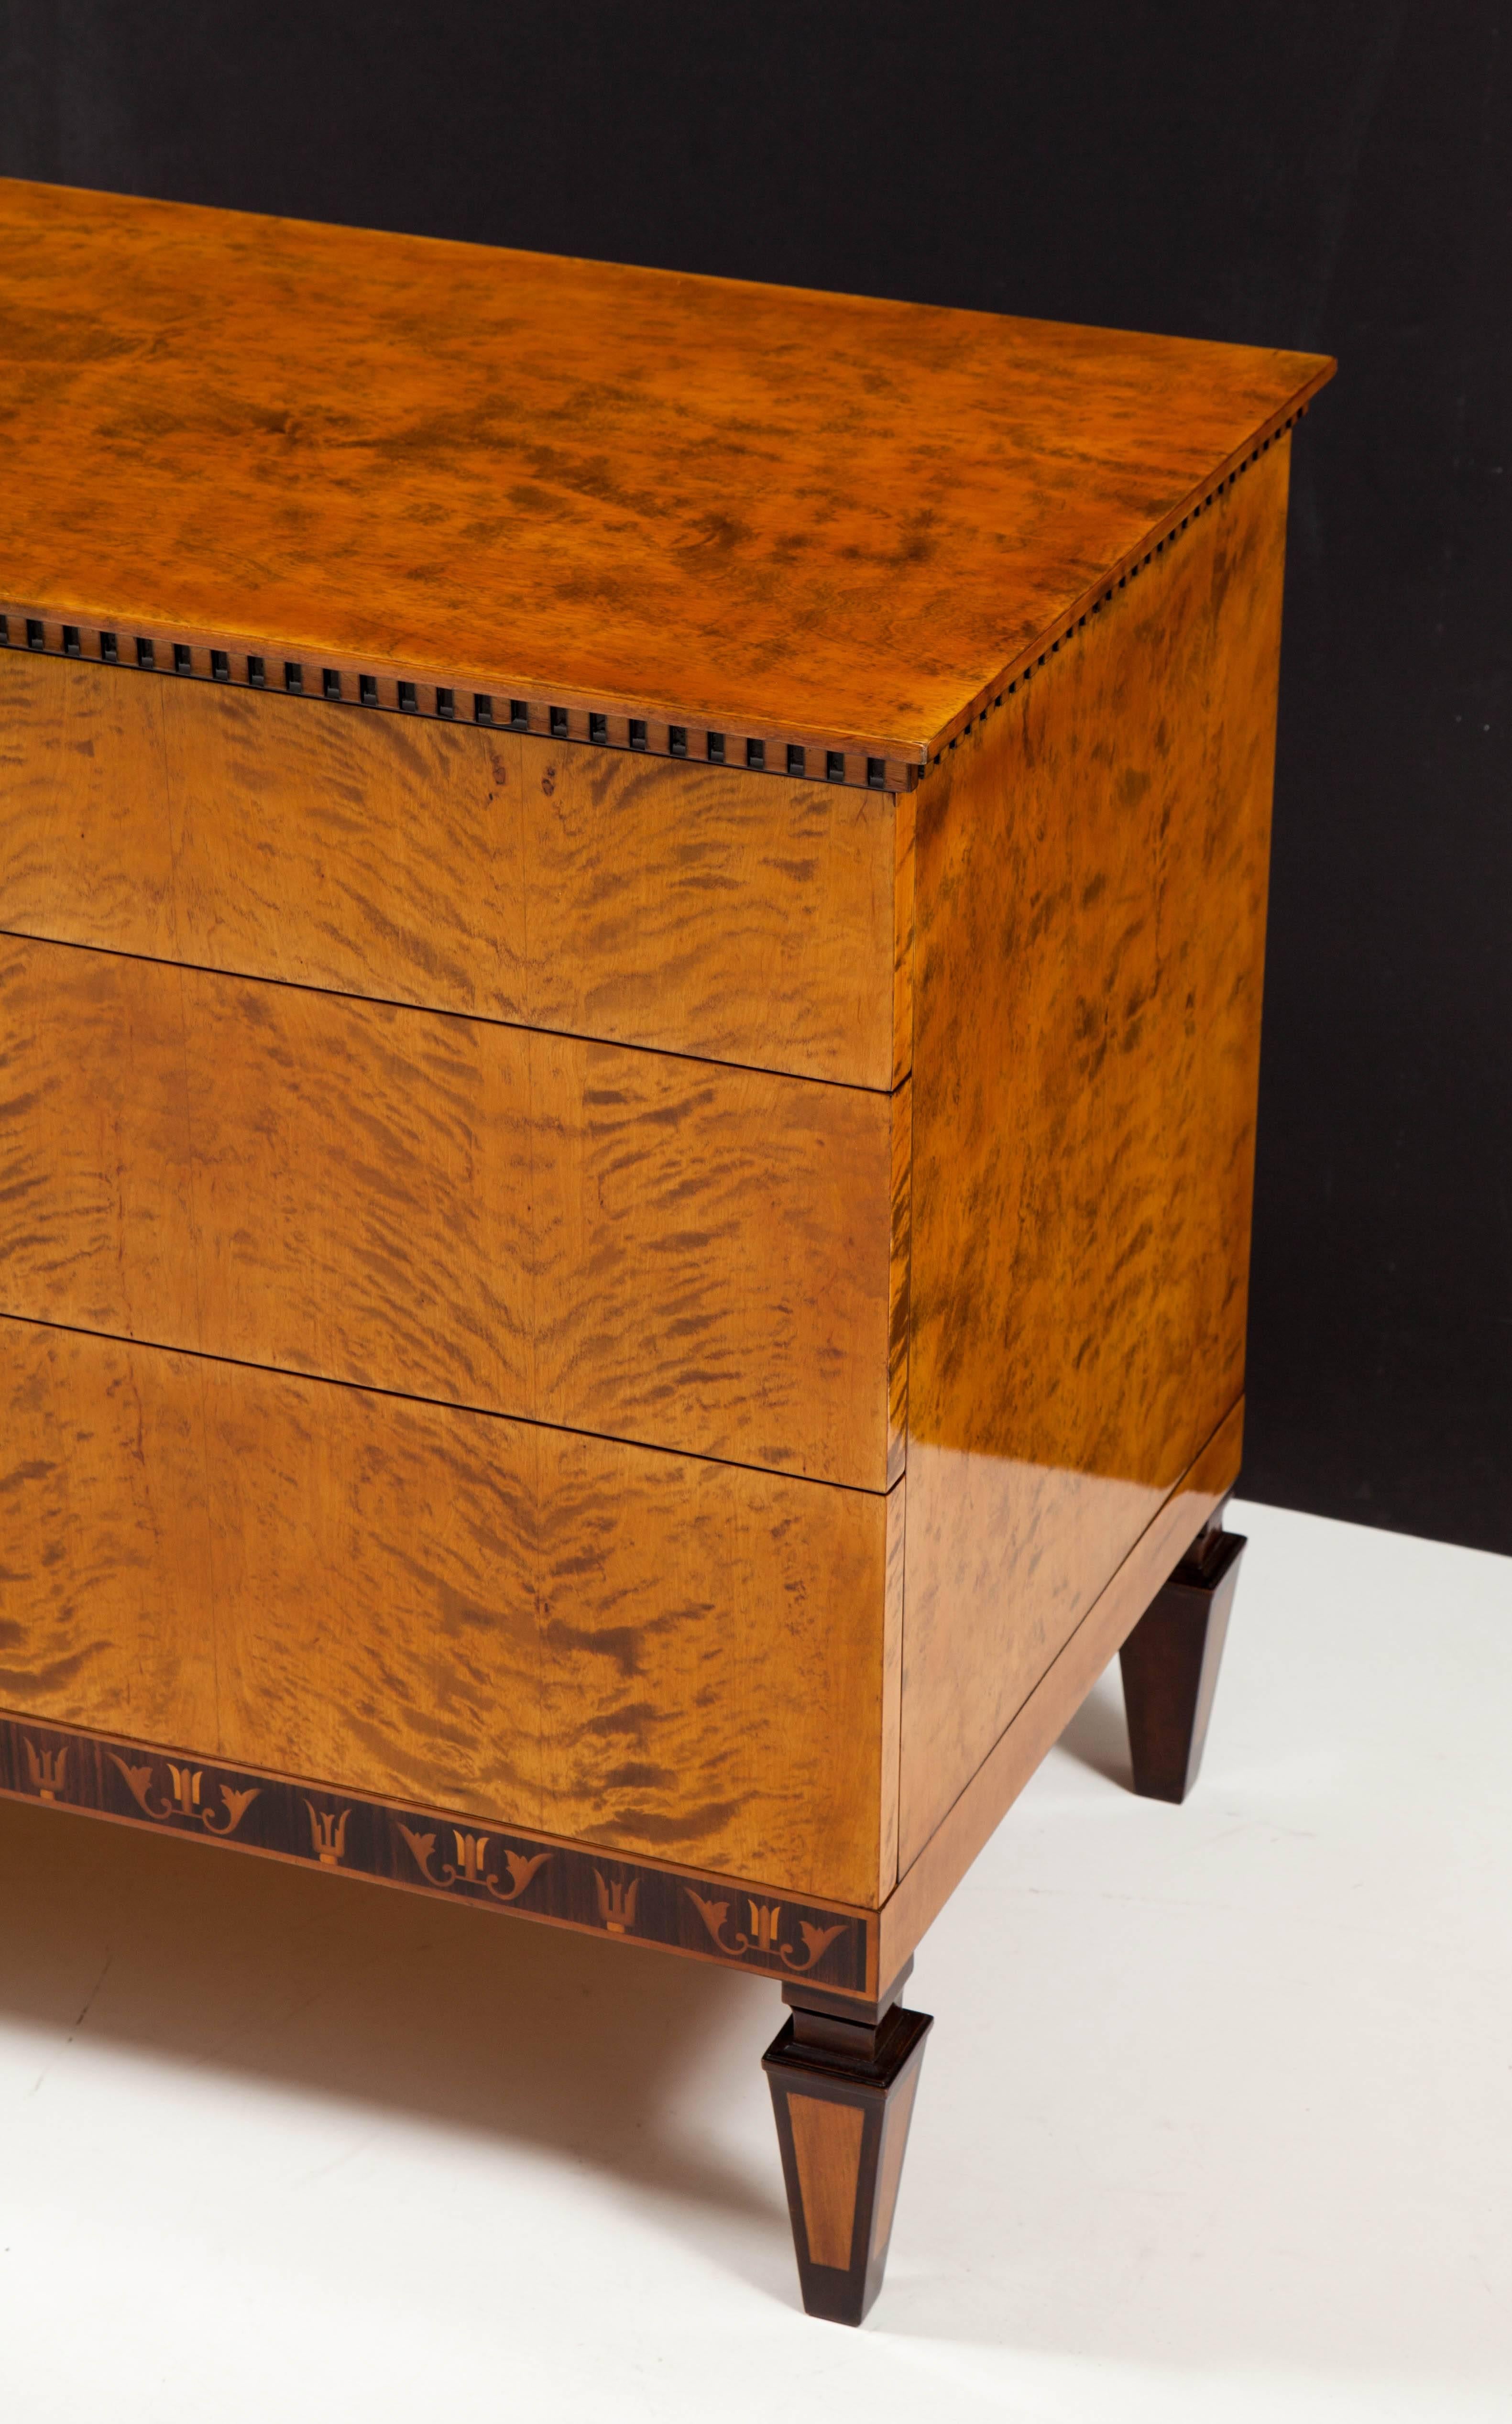 A Swedish grace flamed birch wood and palisander inlaid chest of drawers, circa 1930s, the rectangular top above a dentil molded frieze and three long drawers, the lower frieze with Classic Swedish Deco inlays raised on square tapered feet.